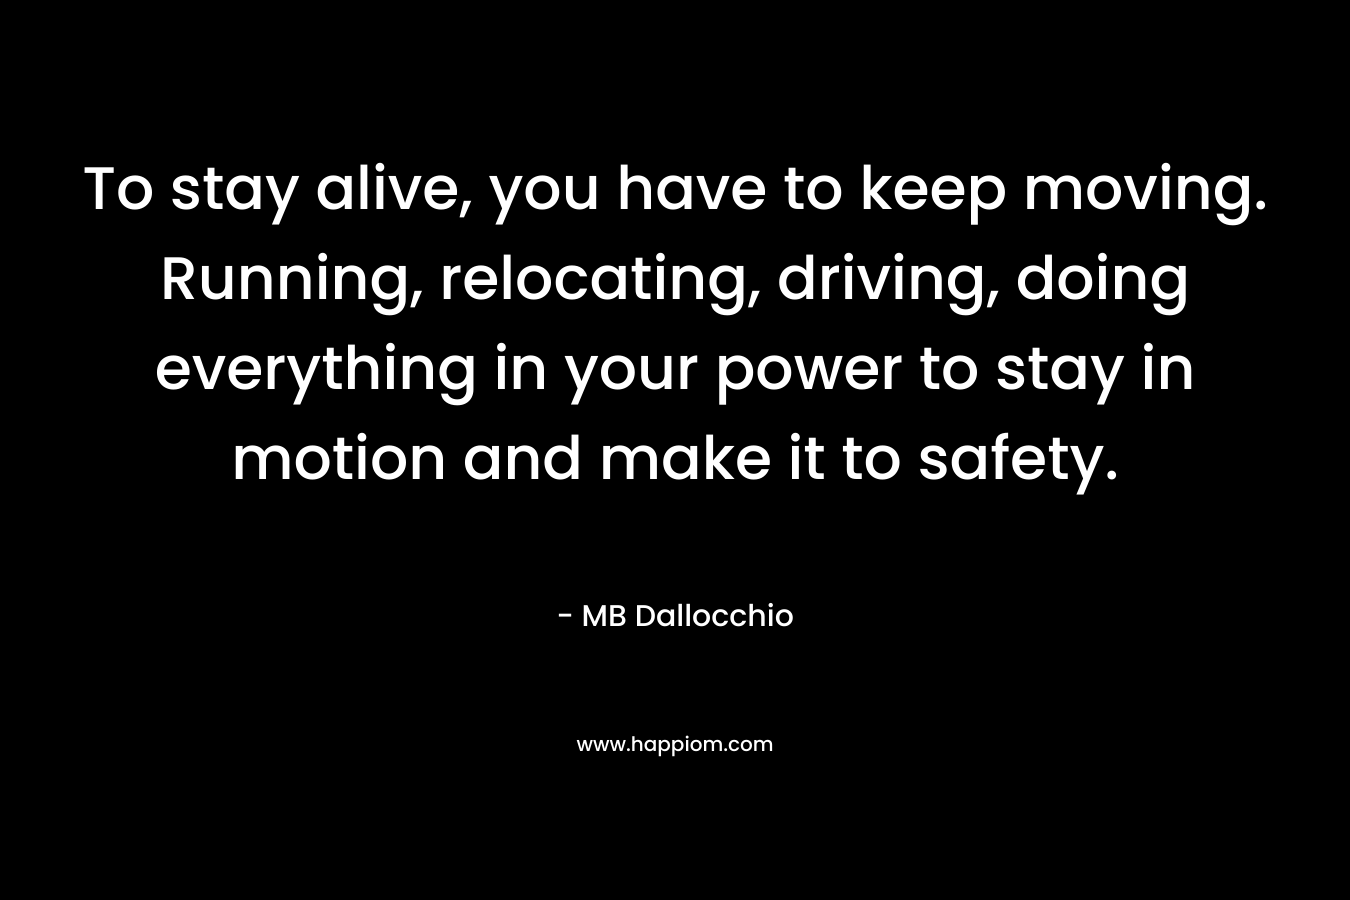 To stay alive, you have to keep moving. Running, relocating, driving, doing everything in your power to stay in motion and make it to safety.